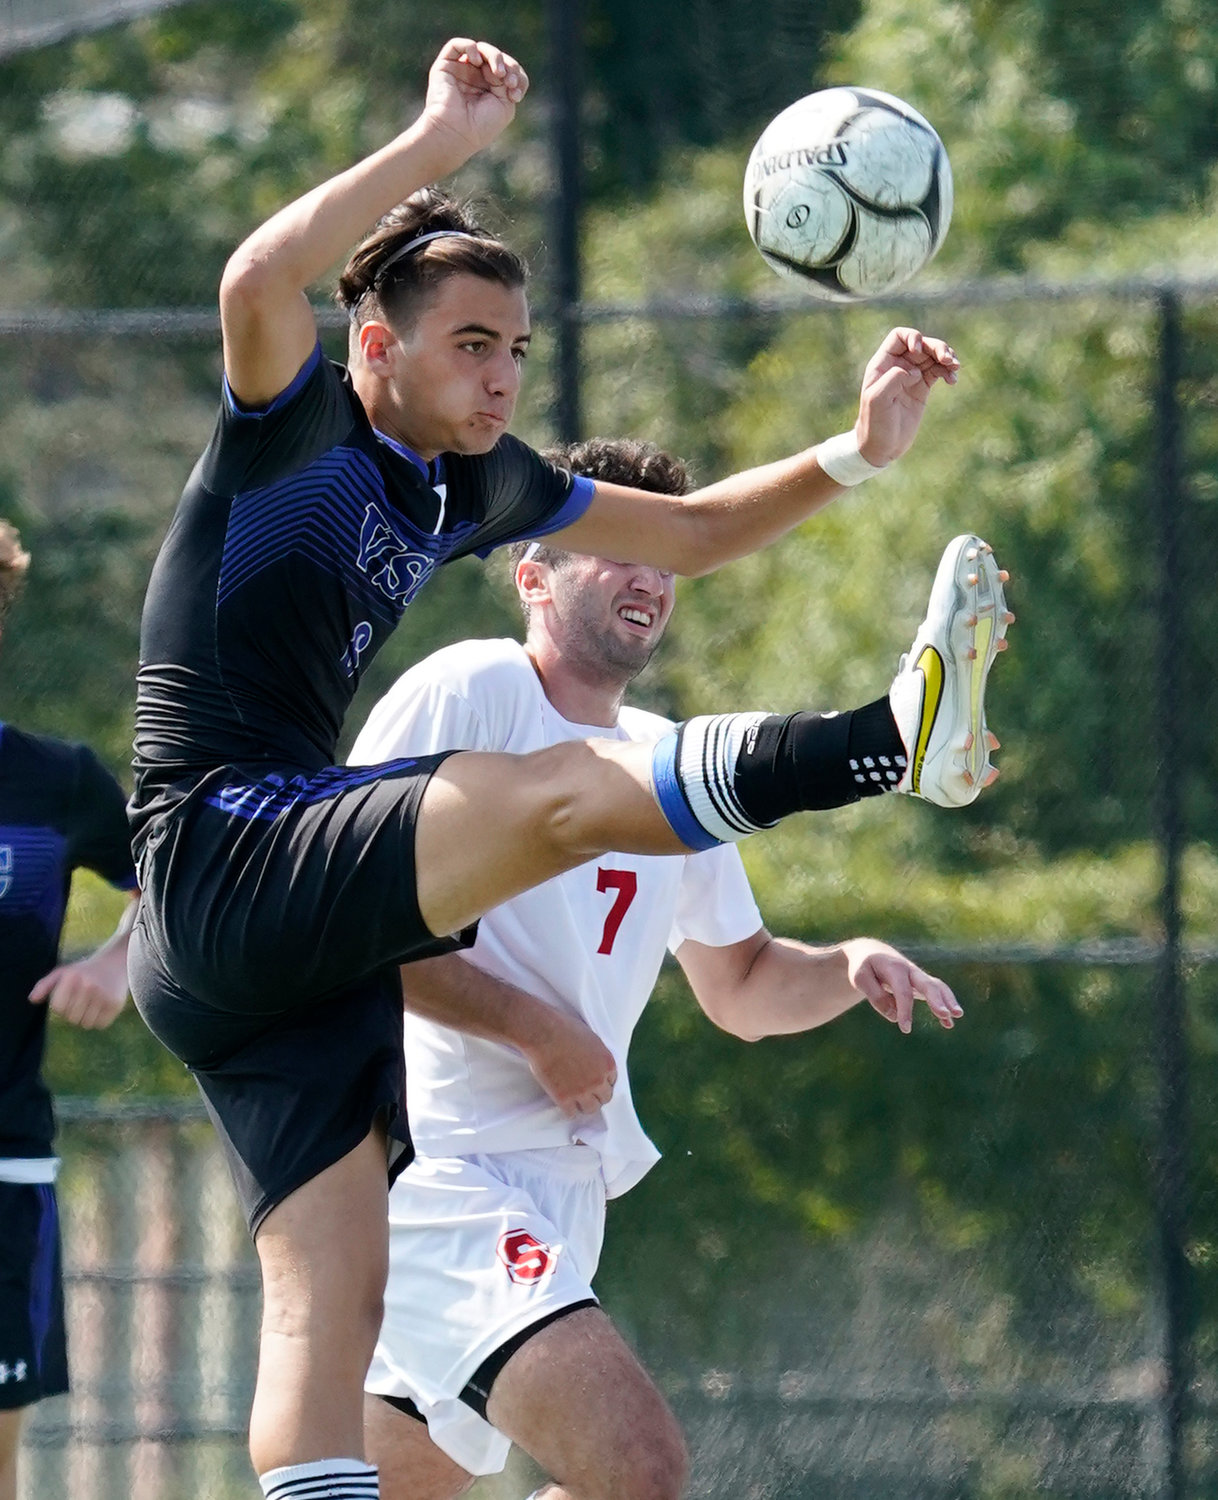 Emmanuel Kasiotis scored twice Sept. 13 as the Eagles defeated East Meadow, 3-1, in an early Conference AA matchup.